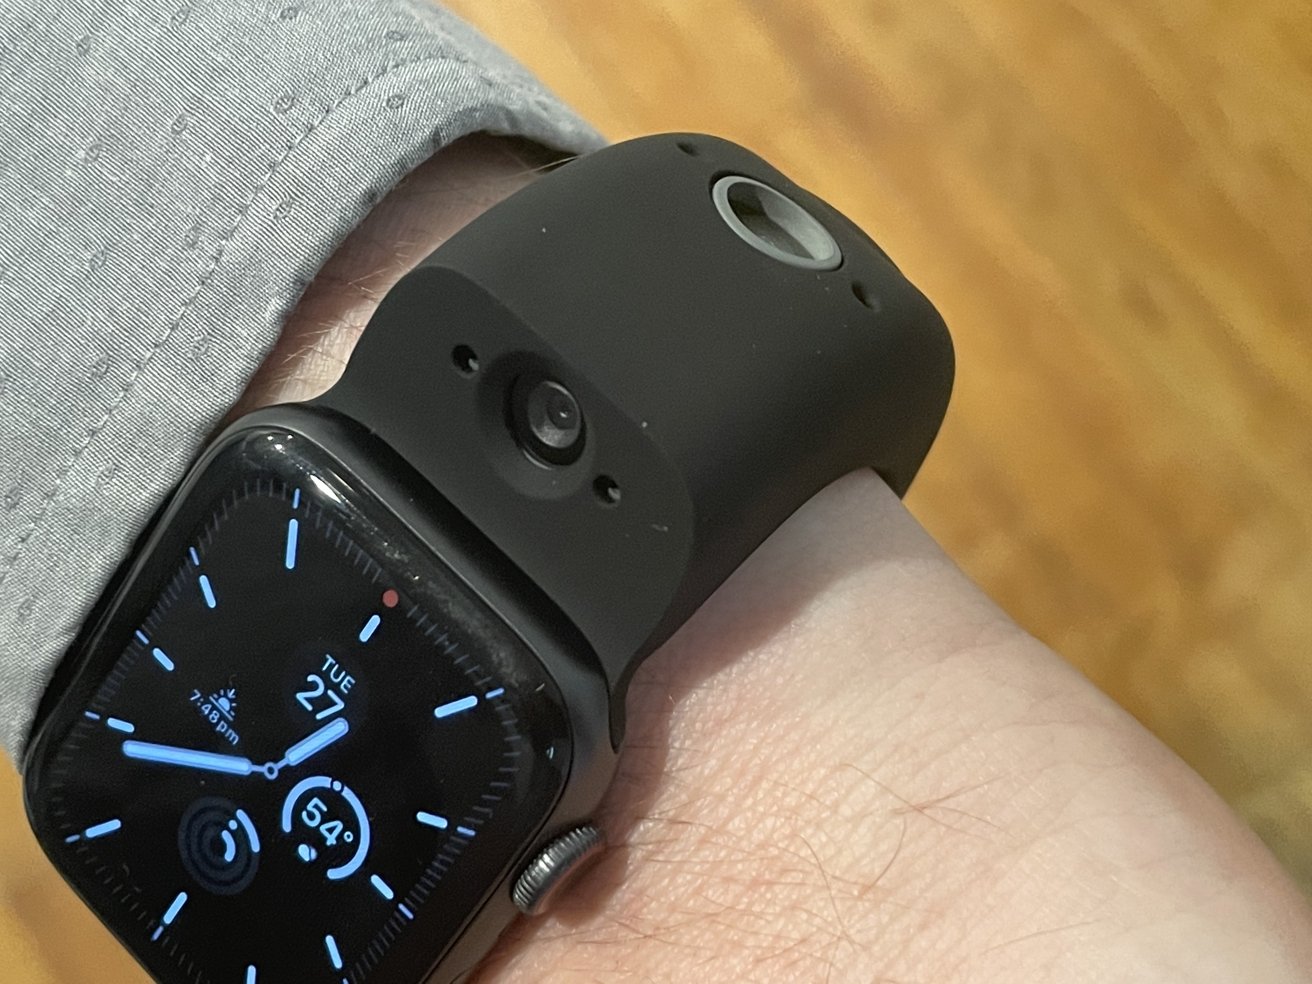 Two cameras are included in the Wristcam, to photograph yourself or something nearby. 